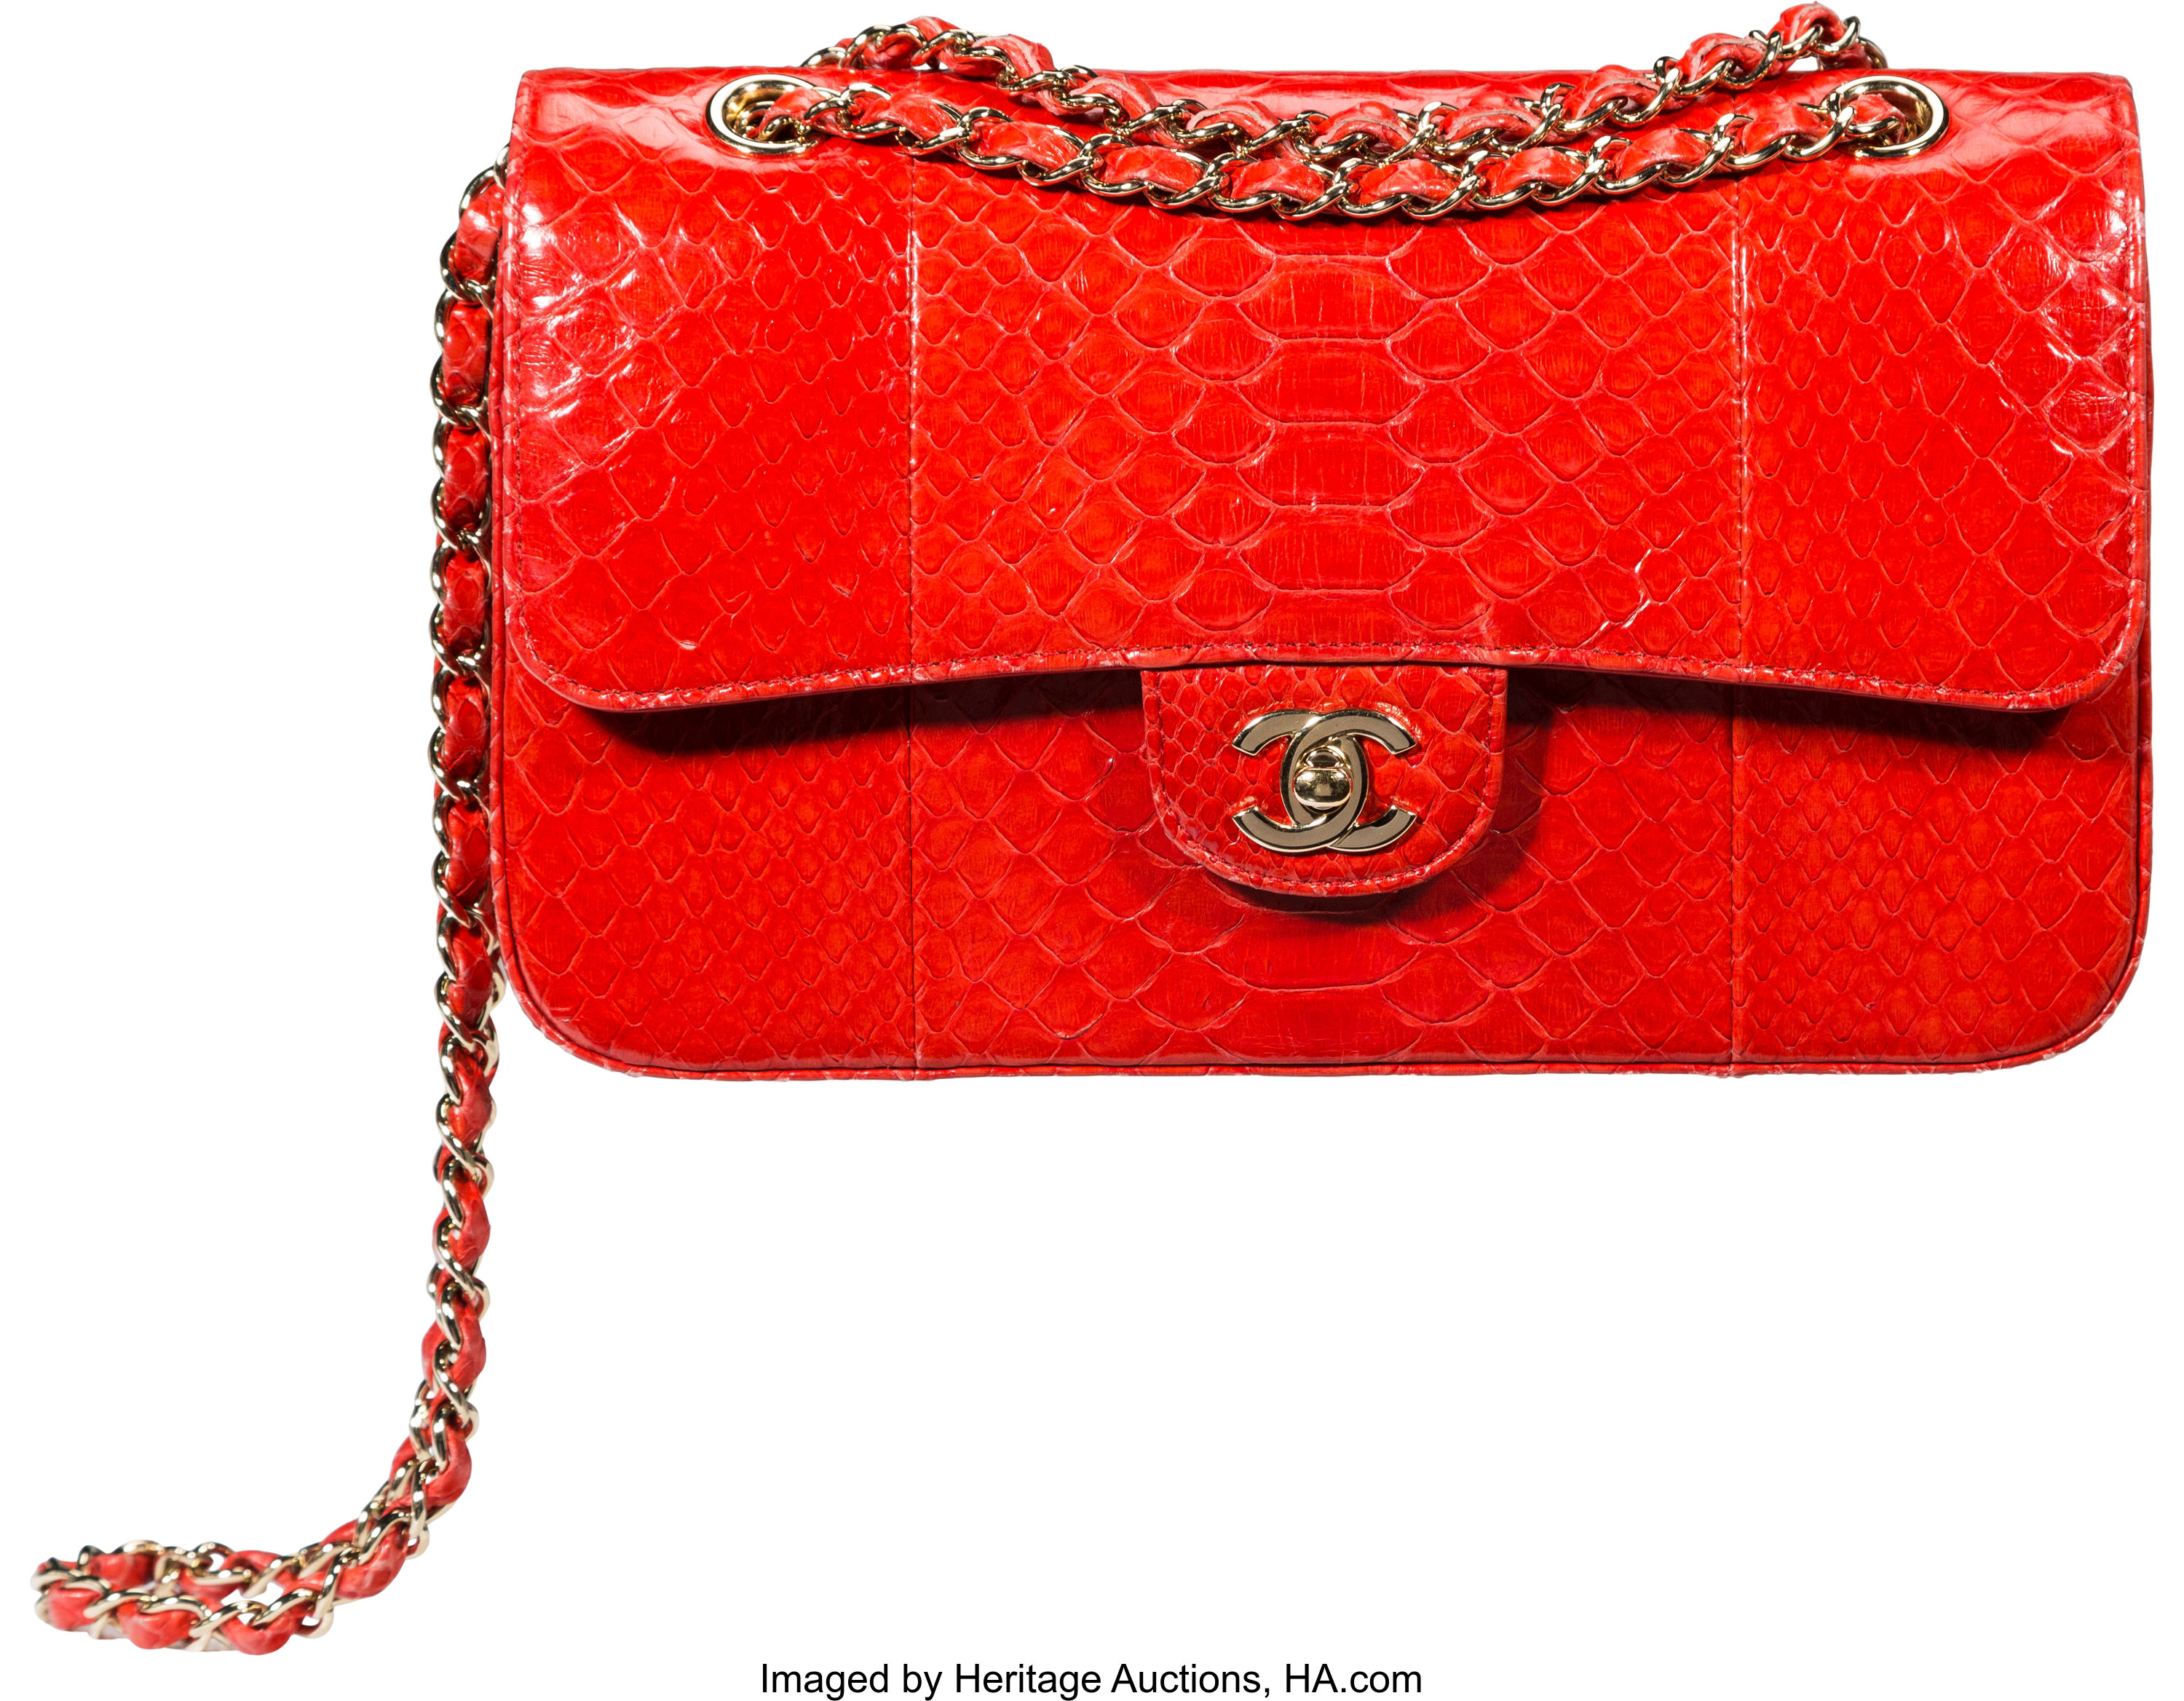 Chanel Red Python Medium Double Flap Bag with Gold Hardware., Lot #58108